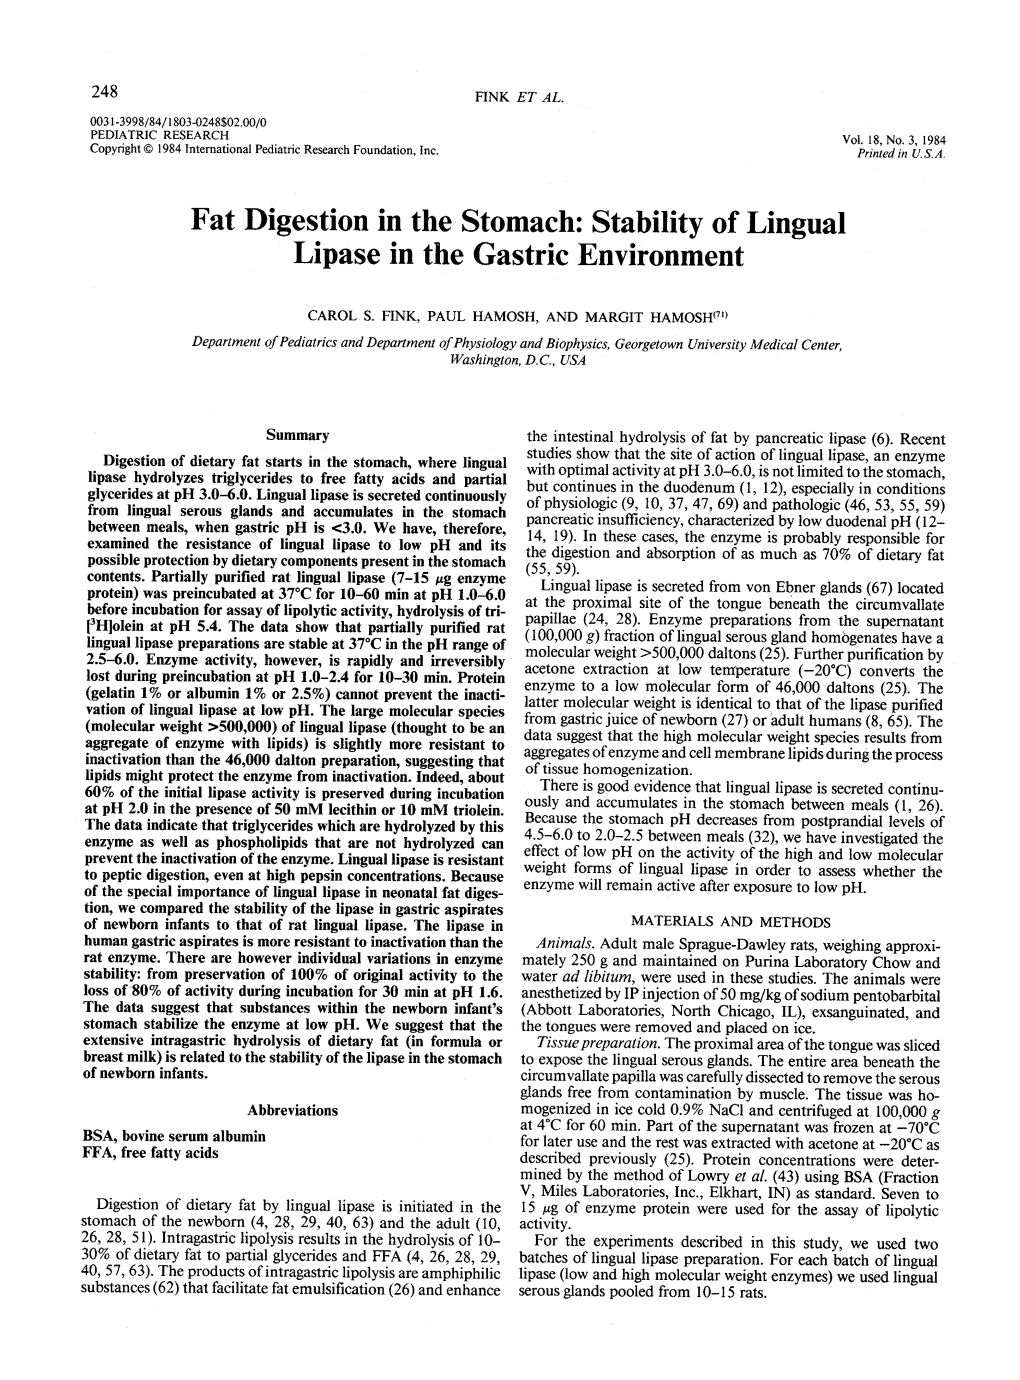 Fat Digestion in the Stomach: Stability of Lingual Lipase in the Gastric Environment